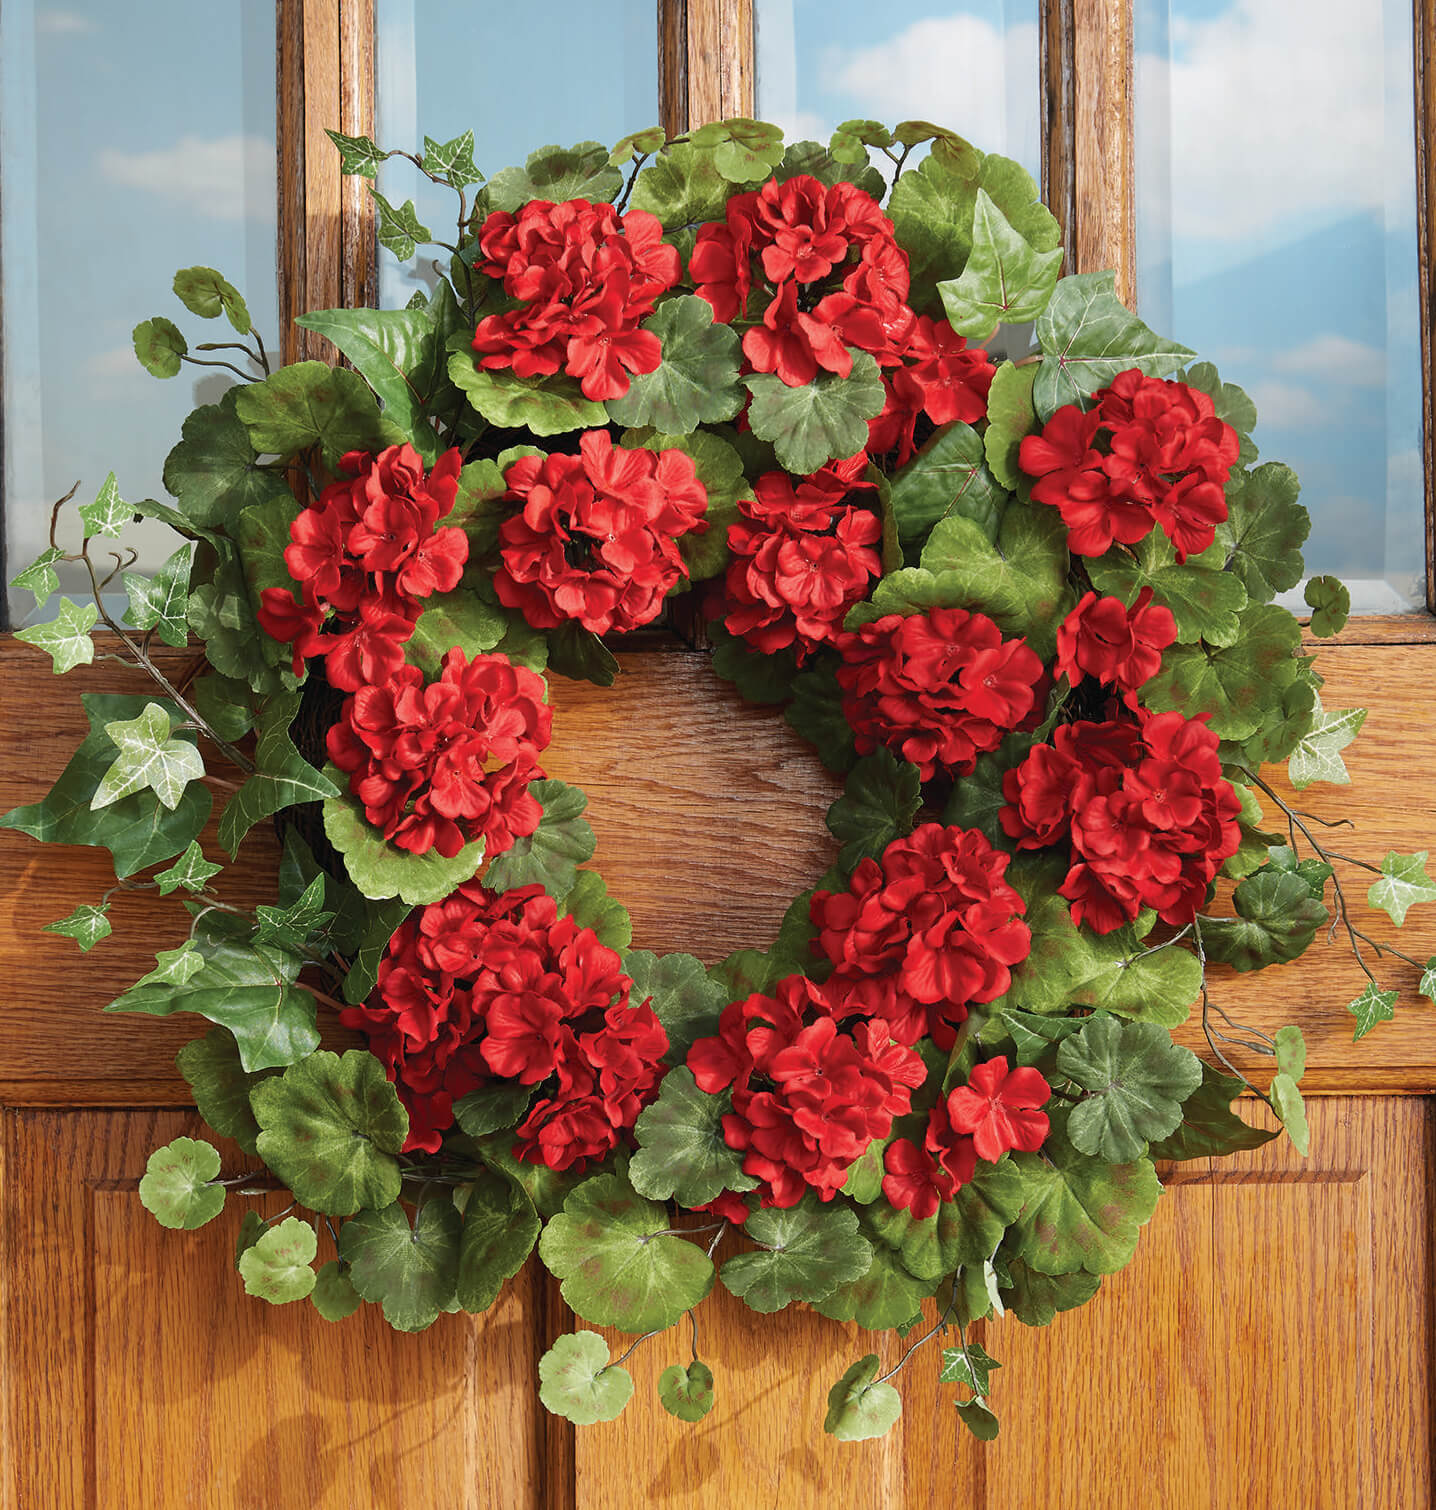 A round red geranium wreath with ivy hung on an oak door with paned windows.